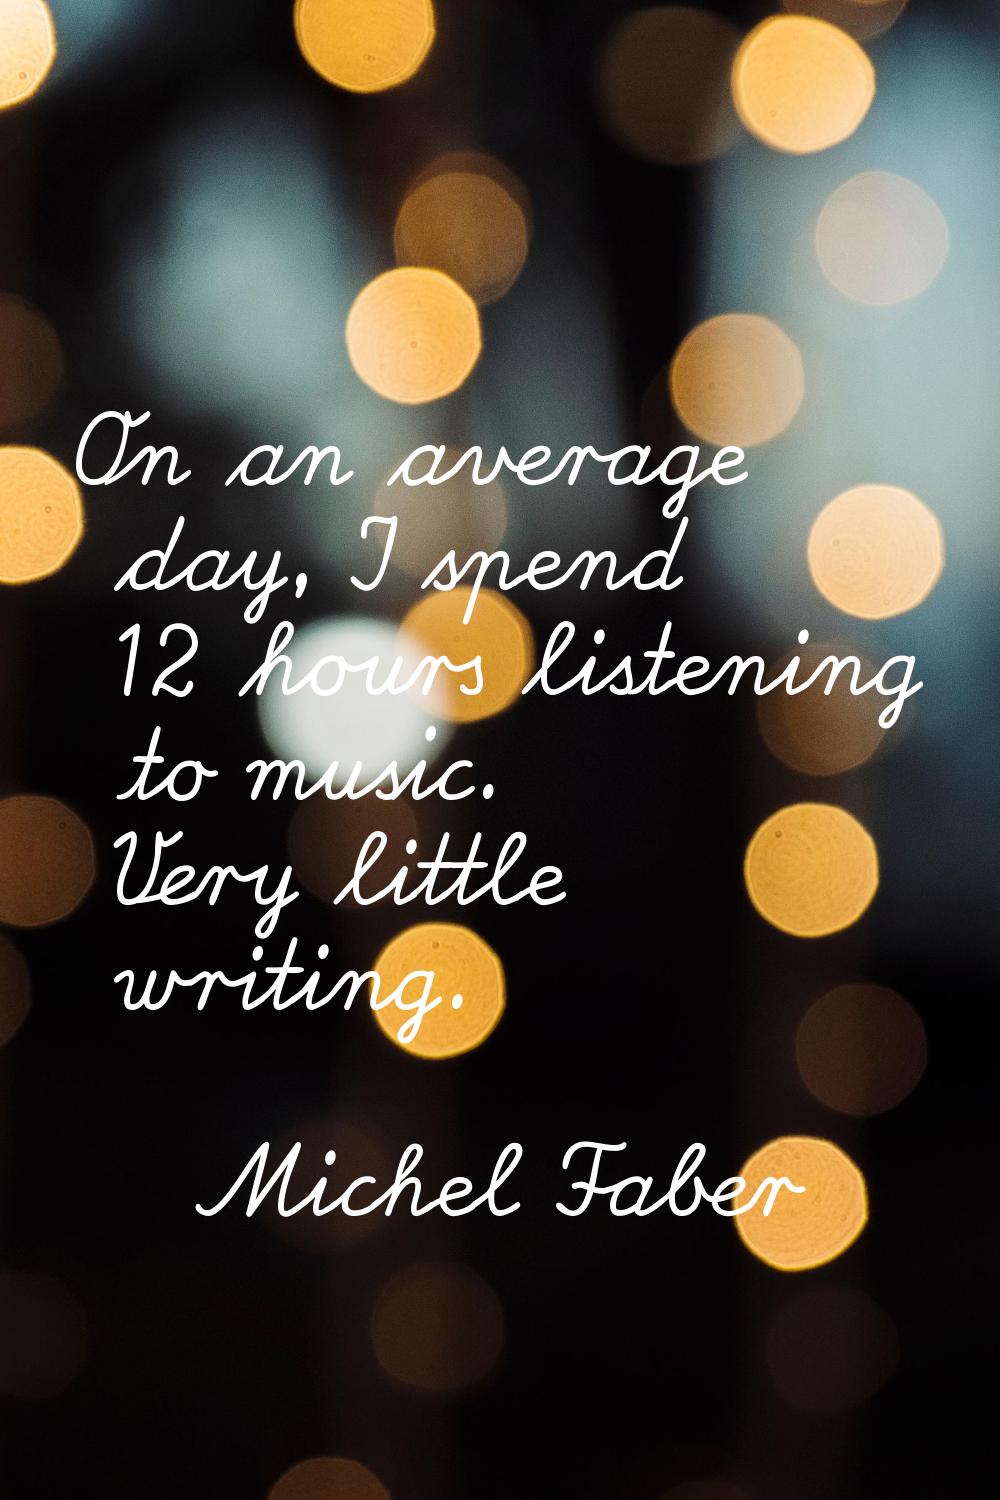 On an average day, I spend 12 hours listening to music. Very little writing.